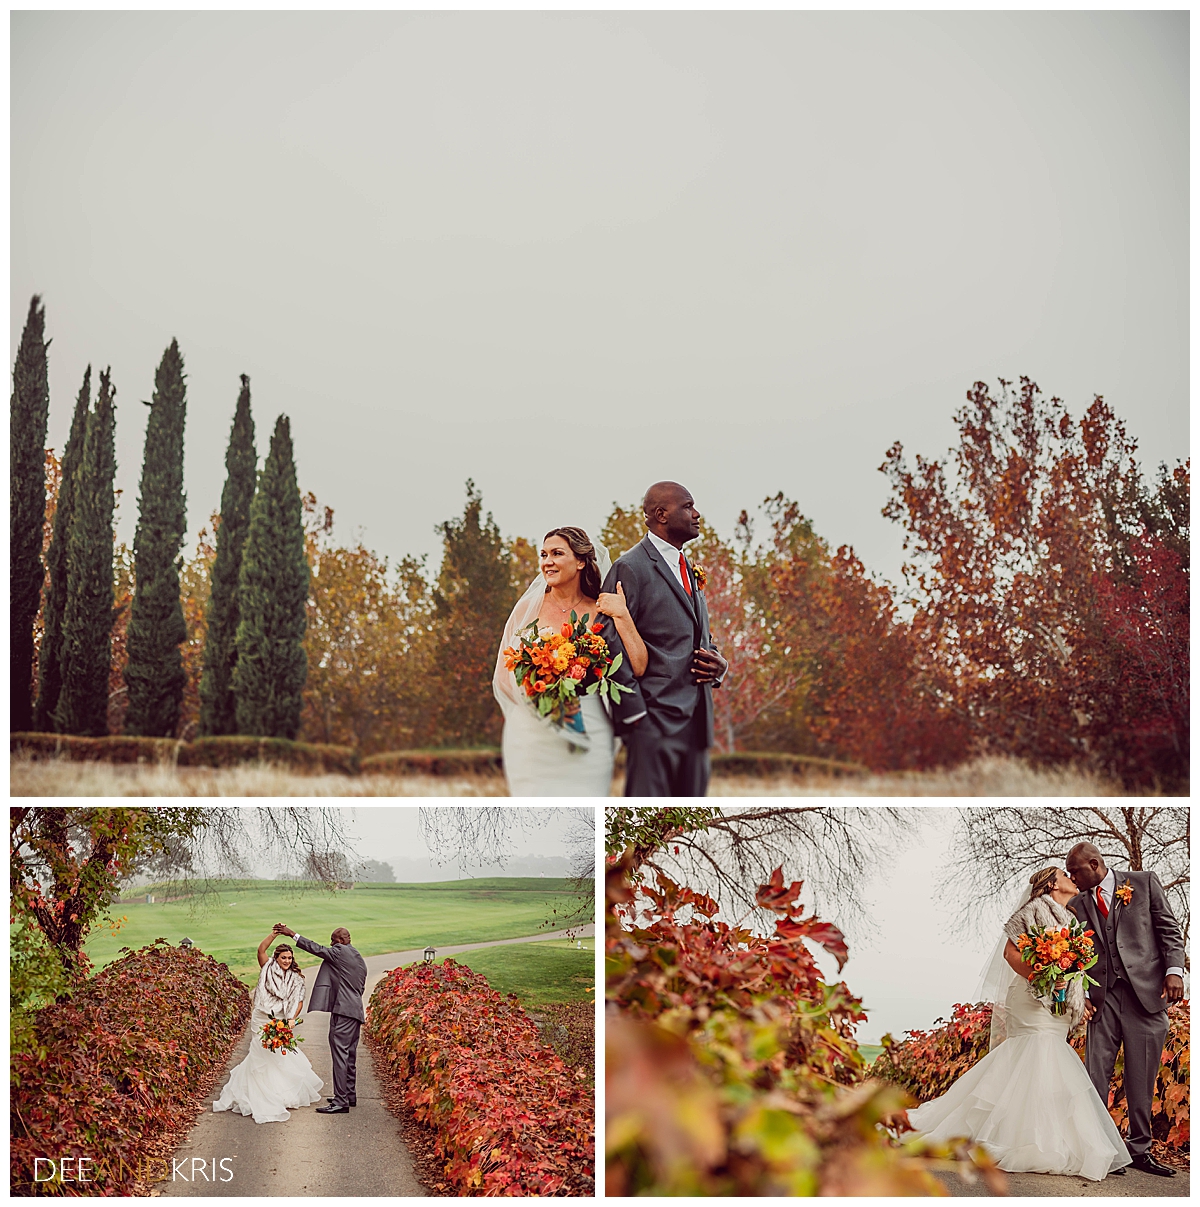 Three images: Top image low angle shot of couple shoulder to shoulder and arm in arm facing away from each other. Bottom left image of groom spinning bride on pathway. Bottom right up angle shot of bride on groom kissing with couple off-center to the right.